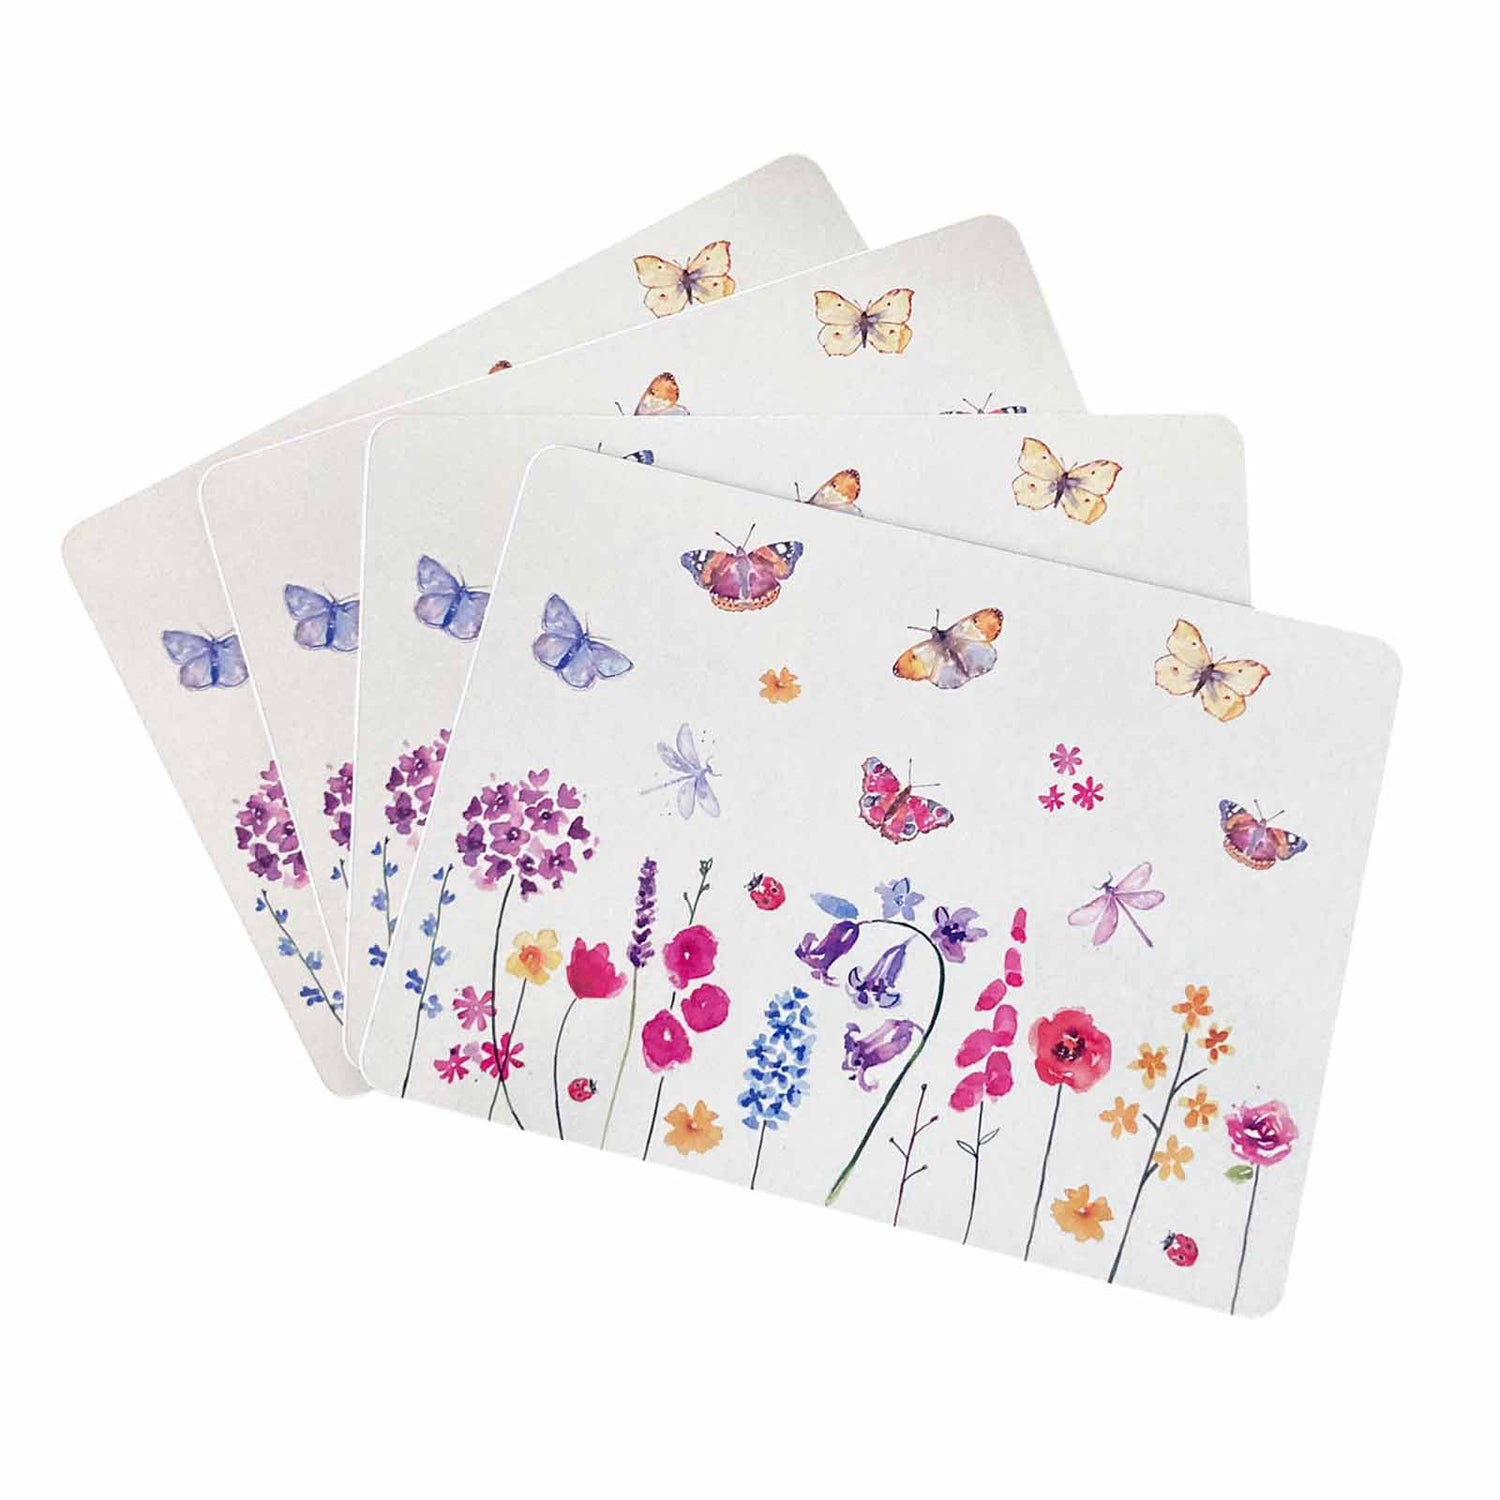 Butterfly Garden Placemats Set of 4